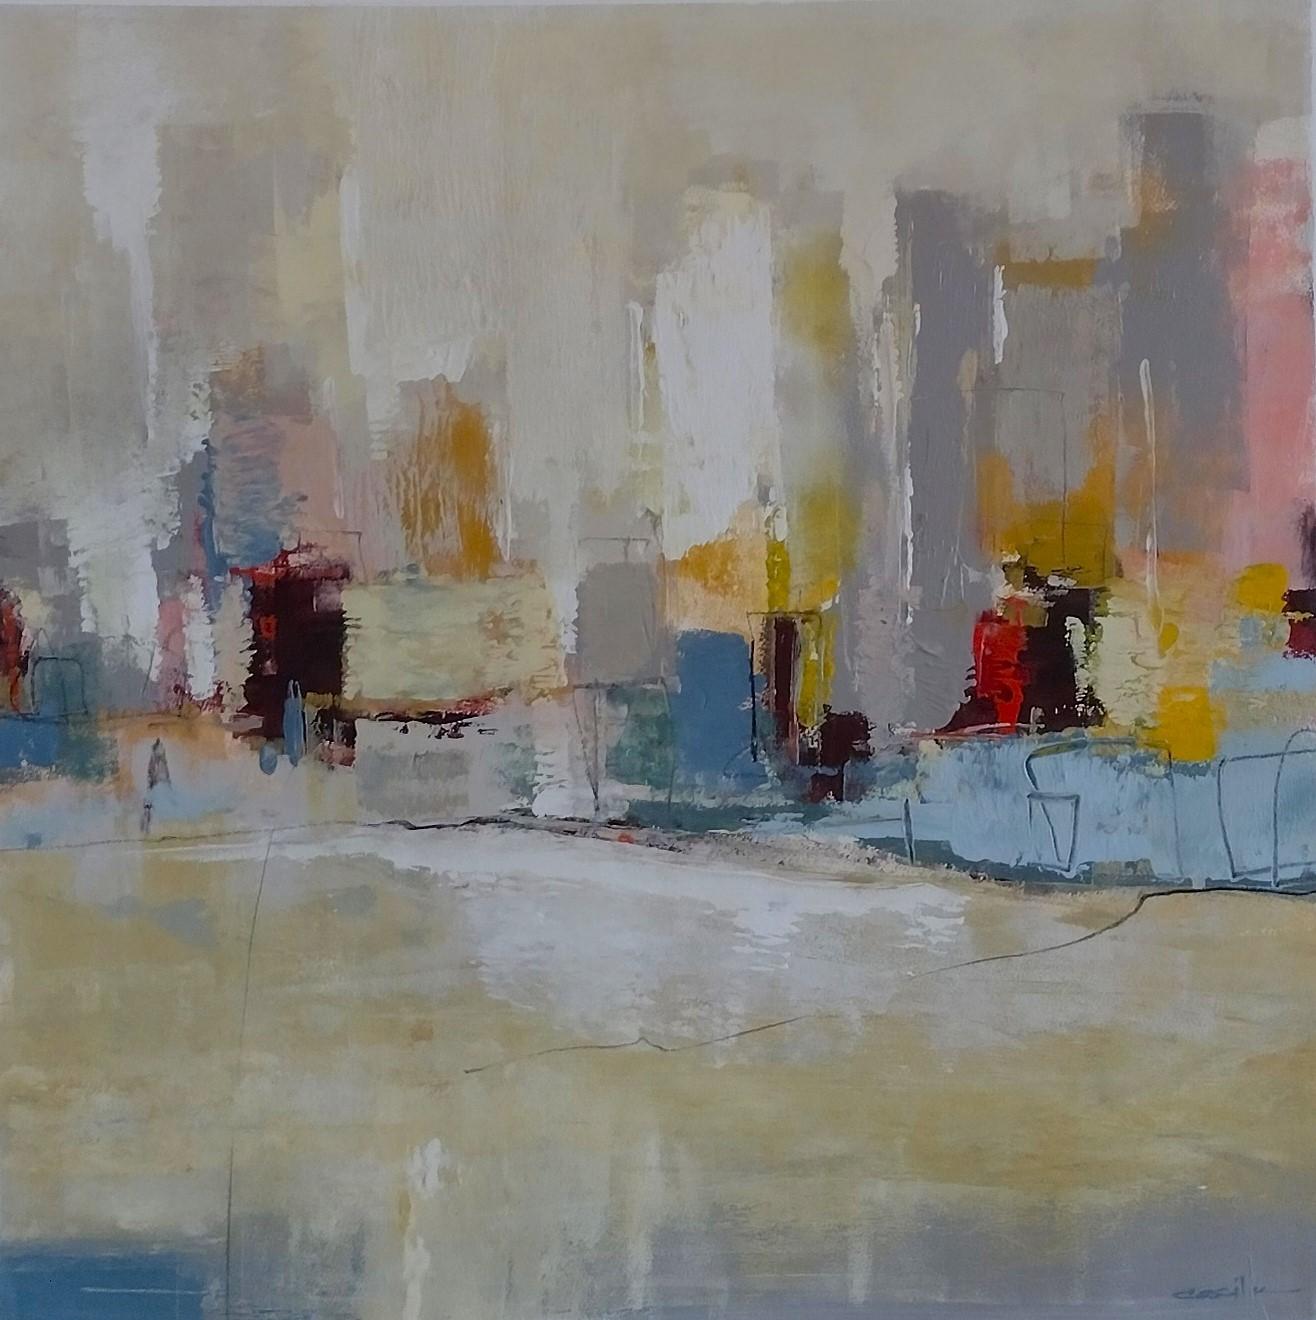 Cecil K.  Abstract Painting - Metro Life - Abstract Expressionist Cityscape - Original Acrylic on Paper 2022